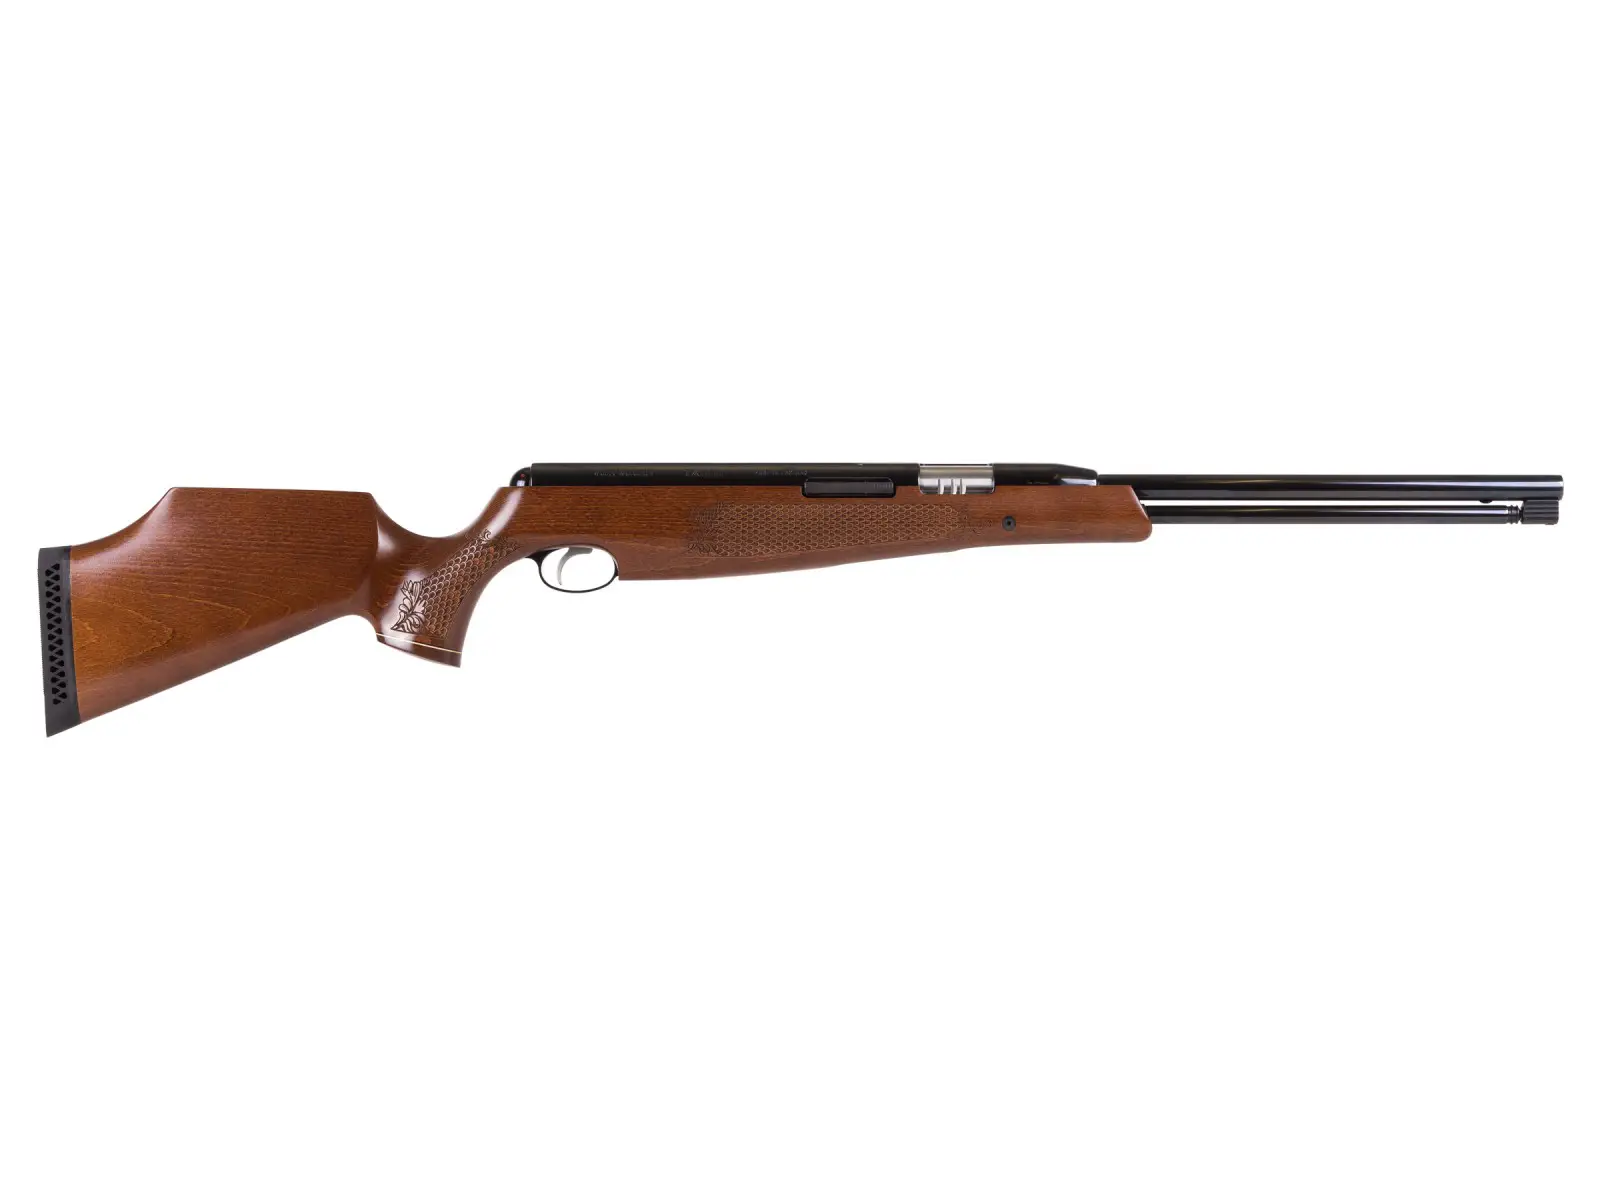 Best .22 Air Rifles - Top 10 fantastic guns for the money (Reviews and Buying Guide 2023)